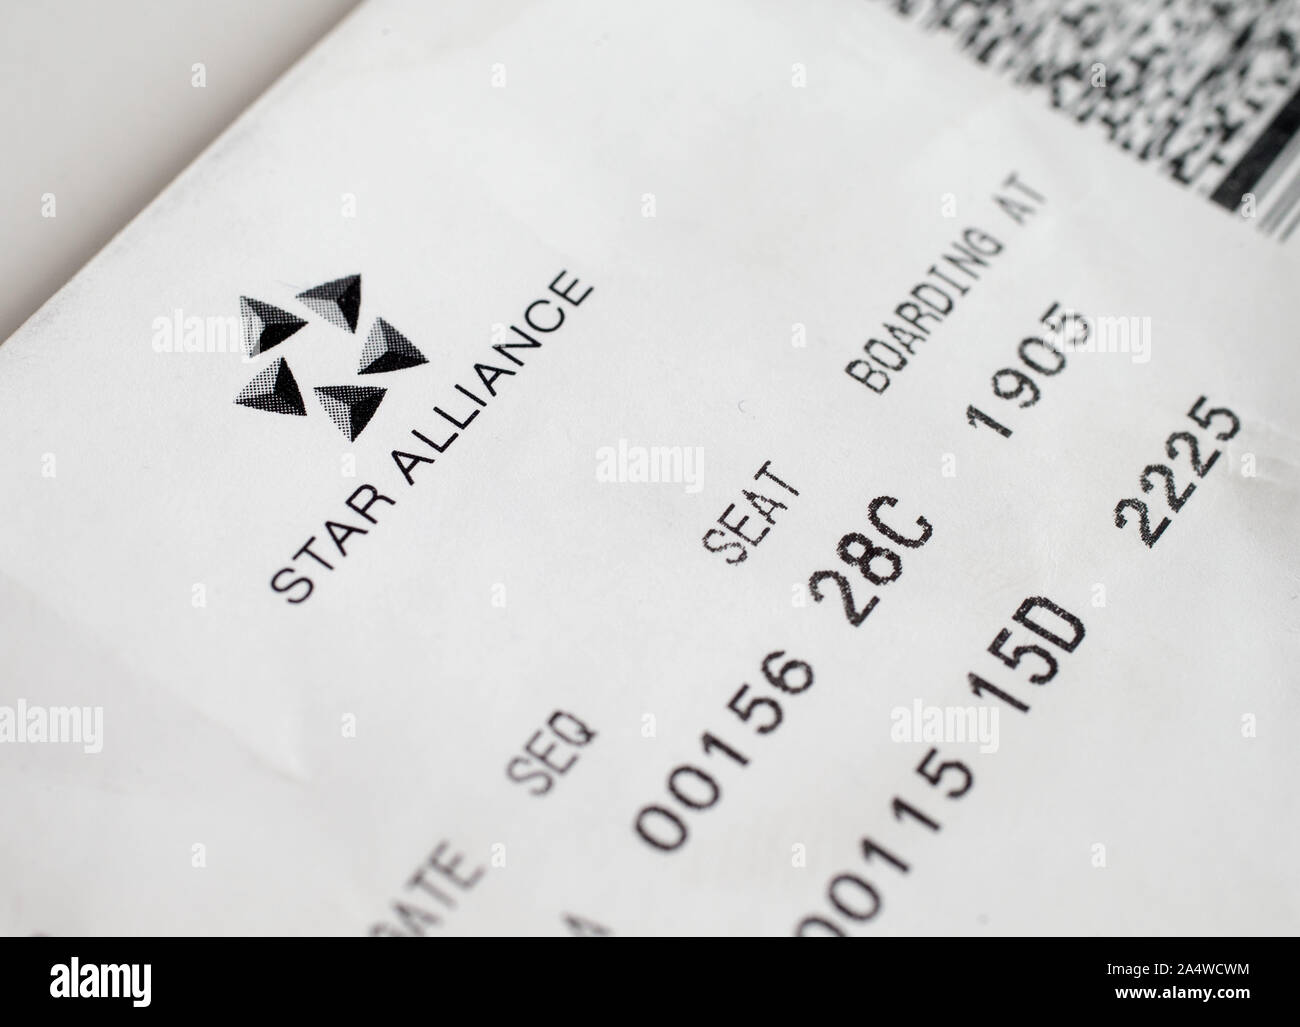 Boarding pass, and airline ticket, from Scandinavian airlines (SAS)Photo  Jeppe Gustafsson Stock Photo - Alamy